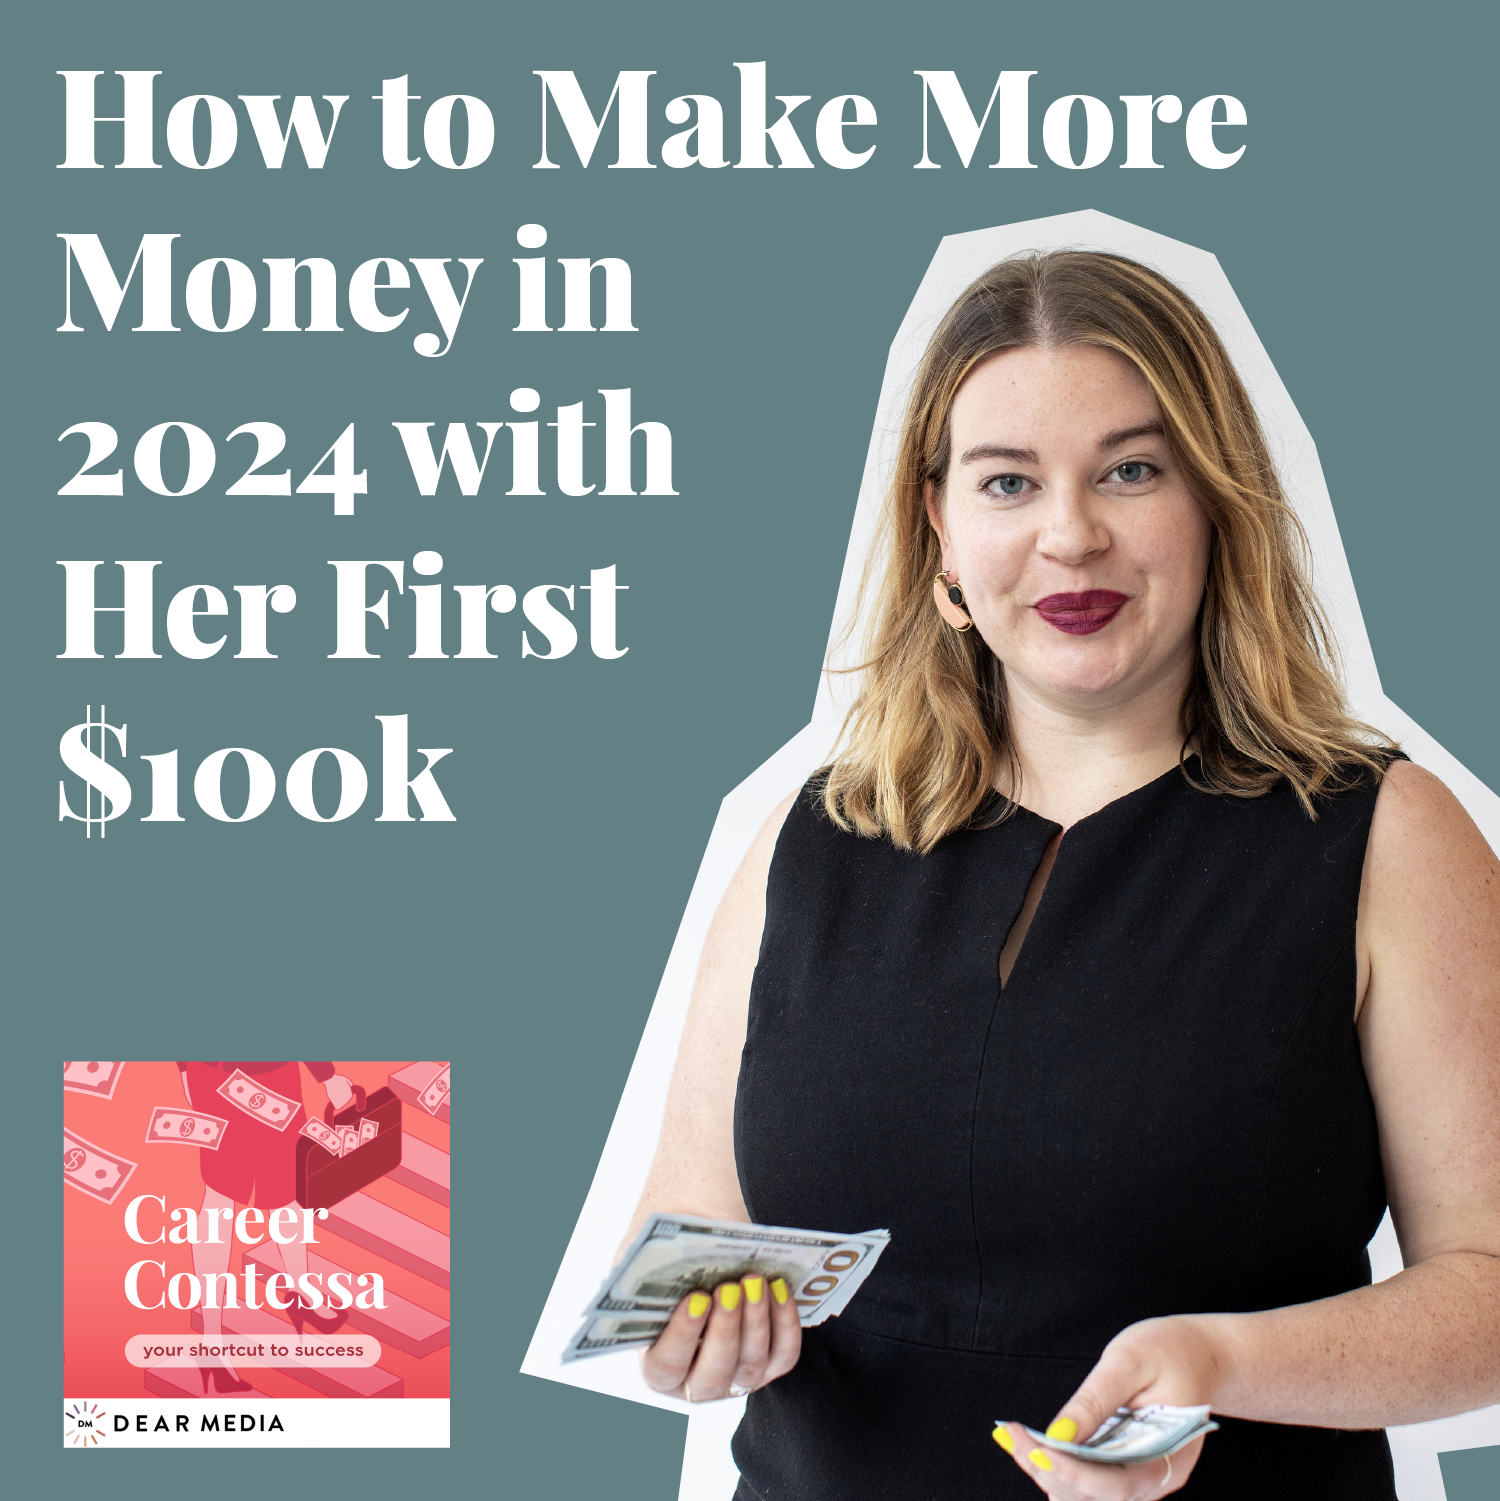 How to Make More Money in 2024 with Her First $100k Image